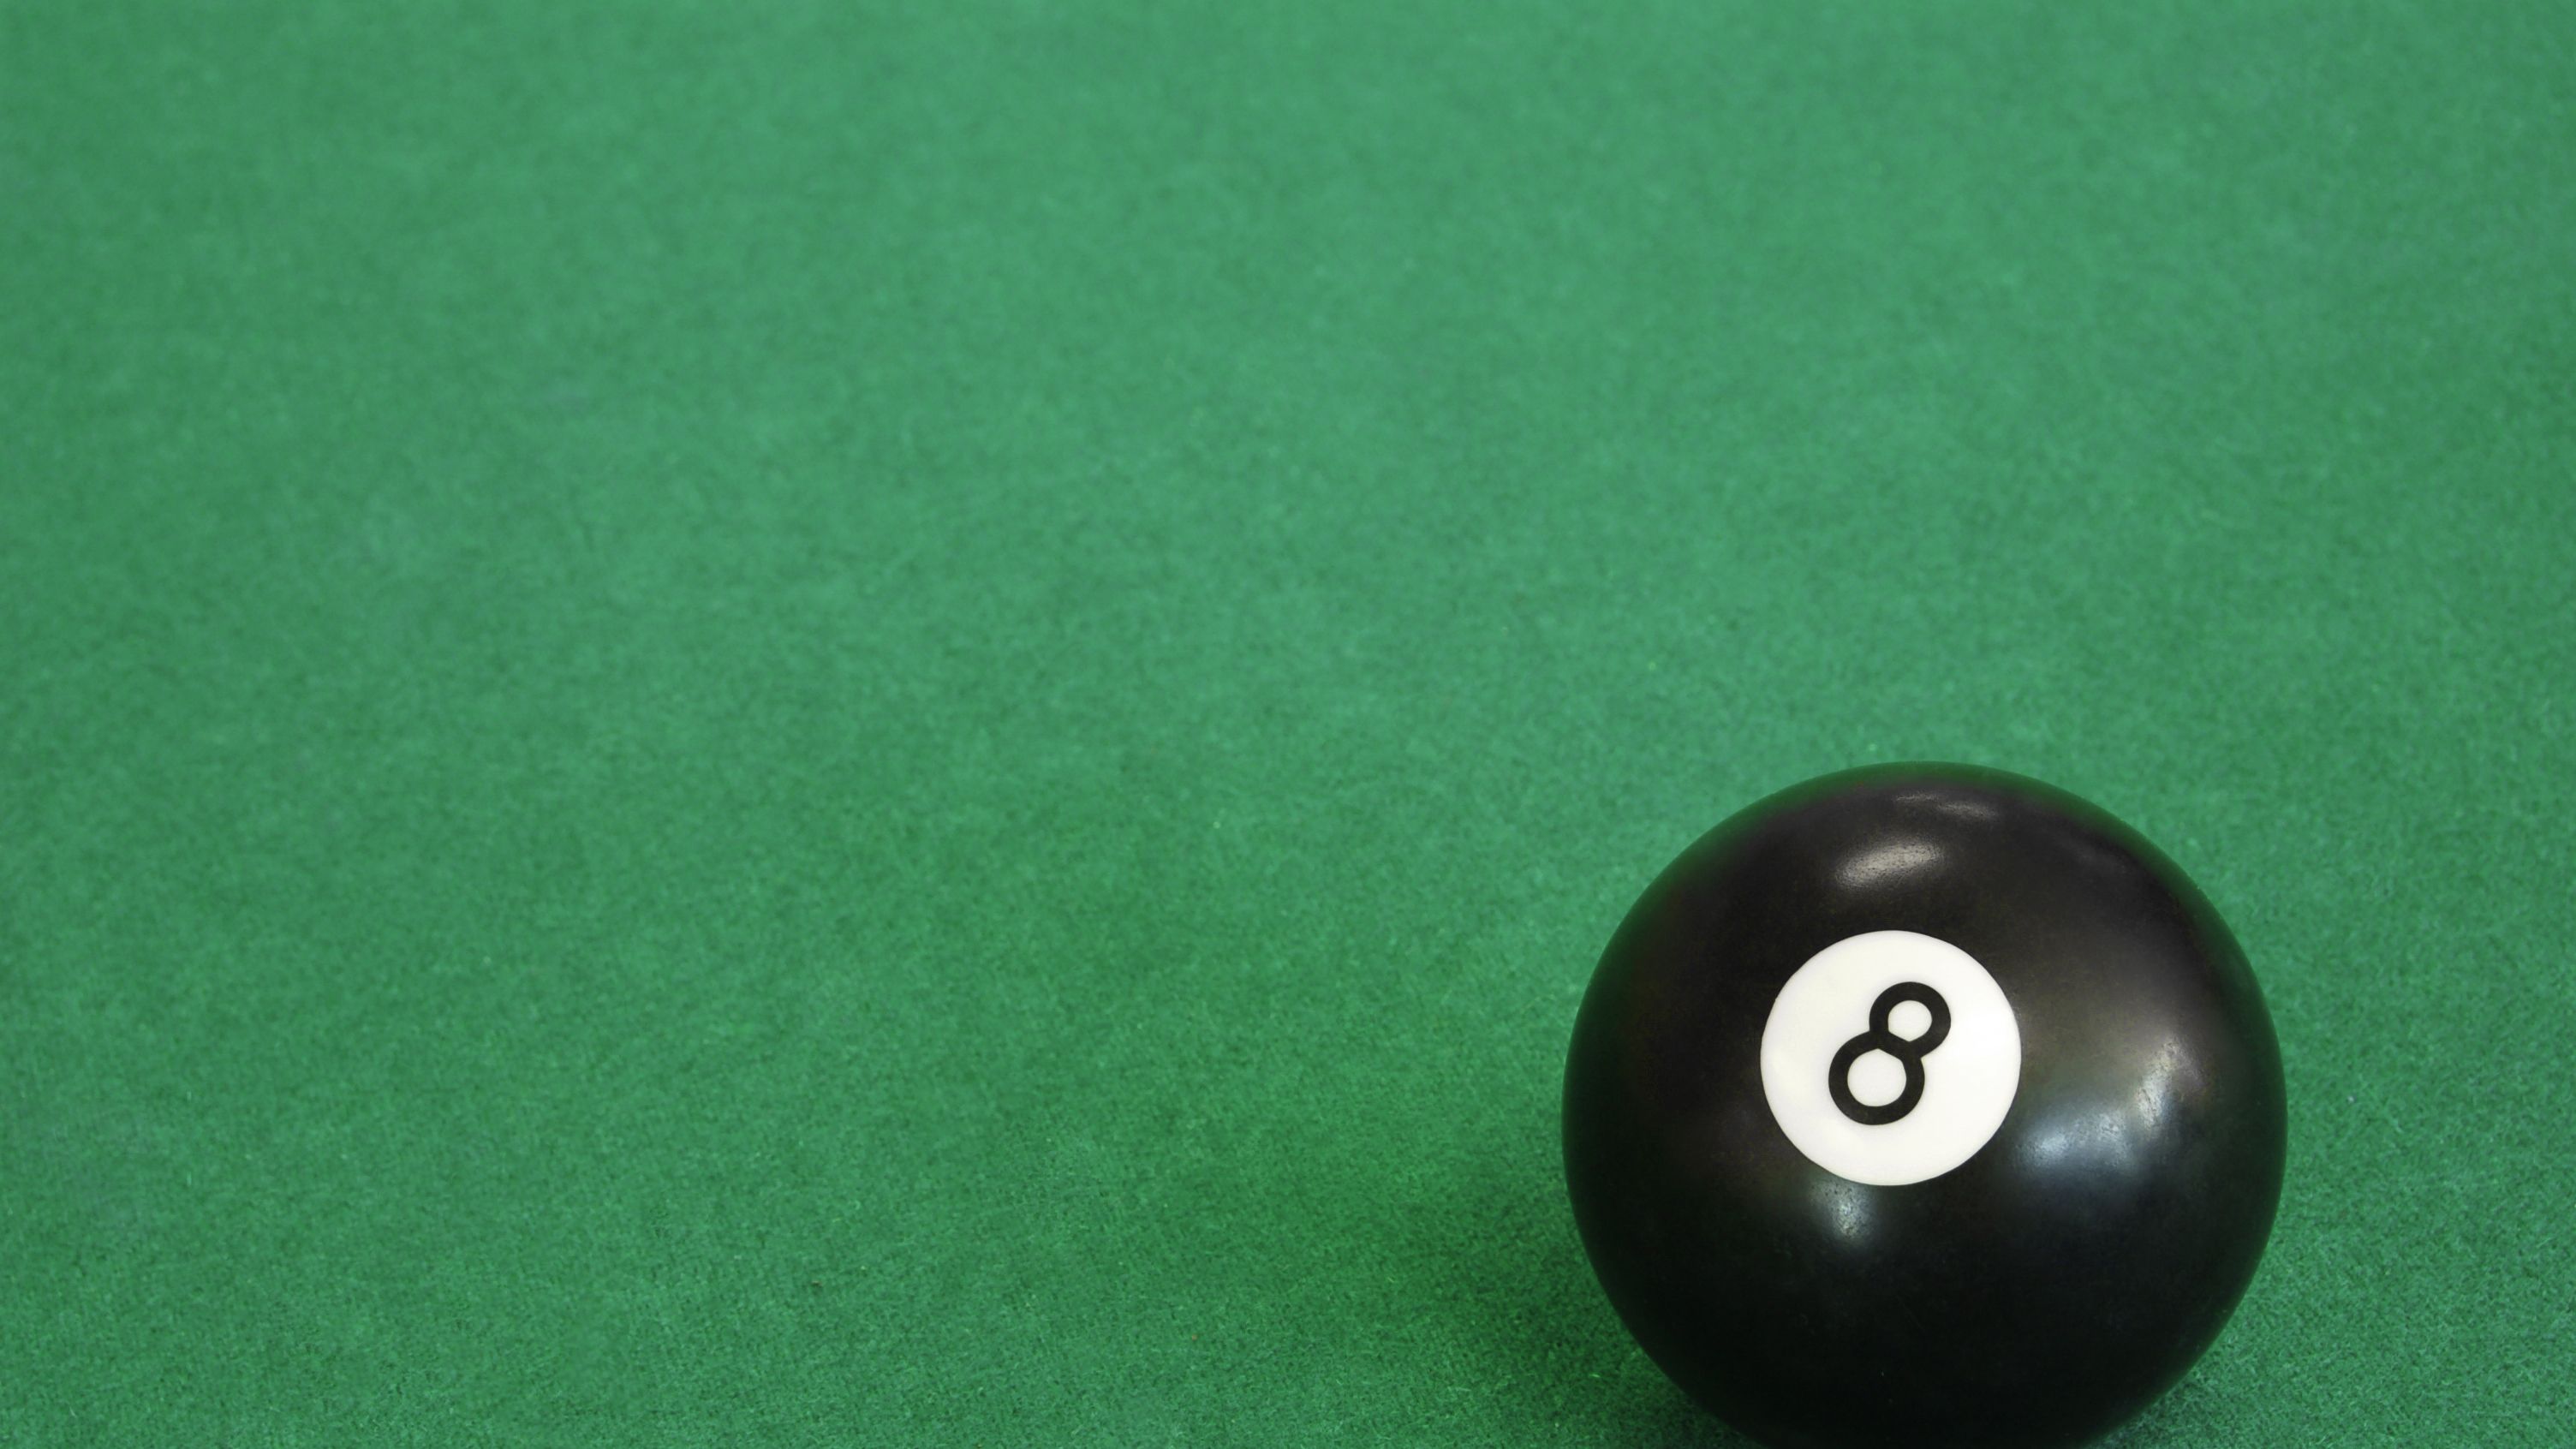 Here's what it means if you see an eight-ball emoji on Facebook